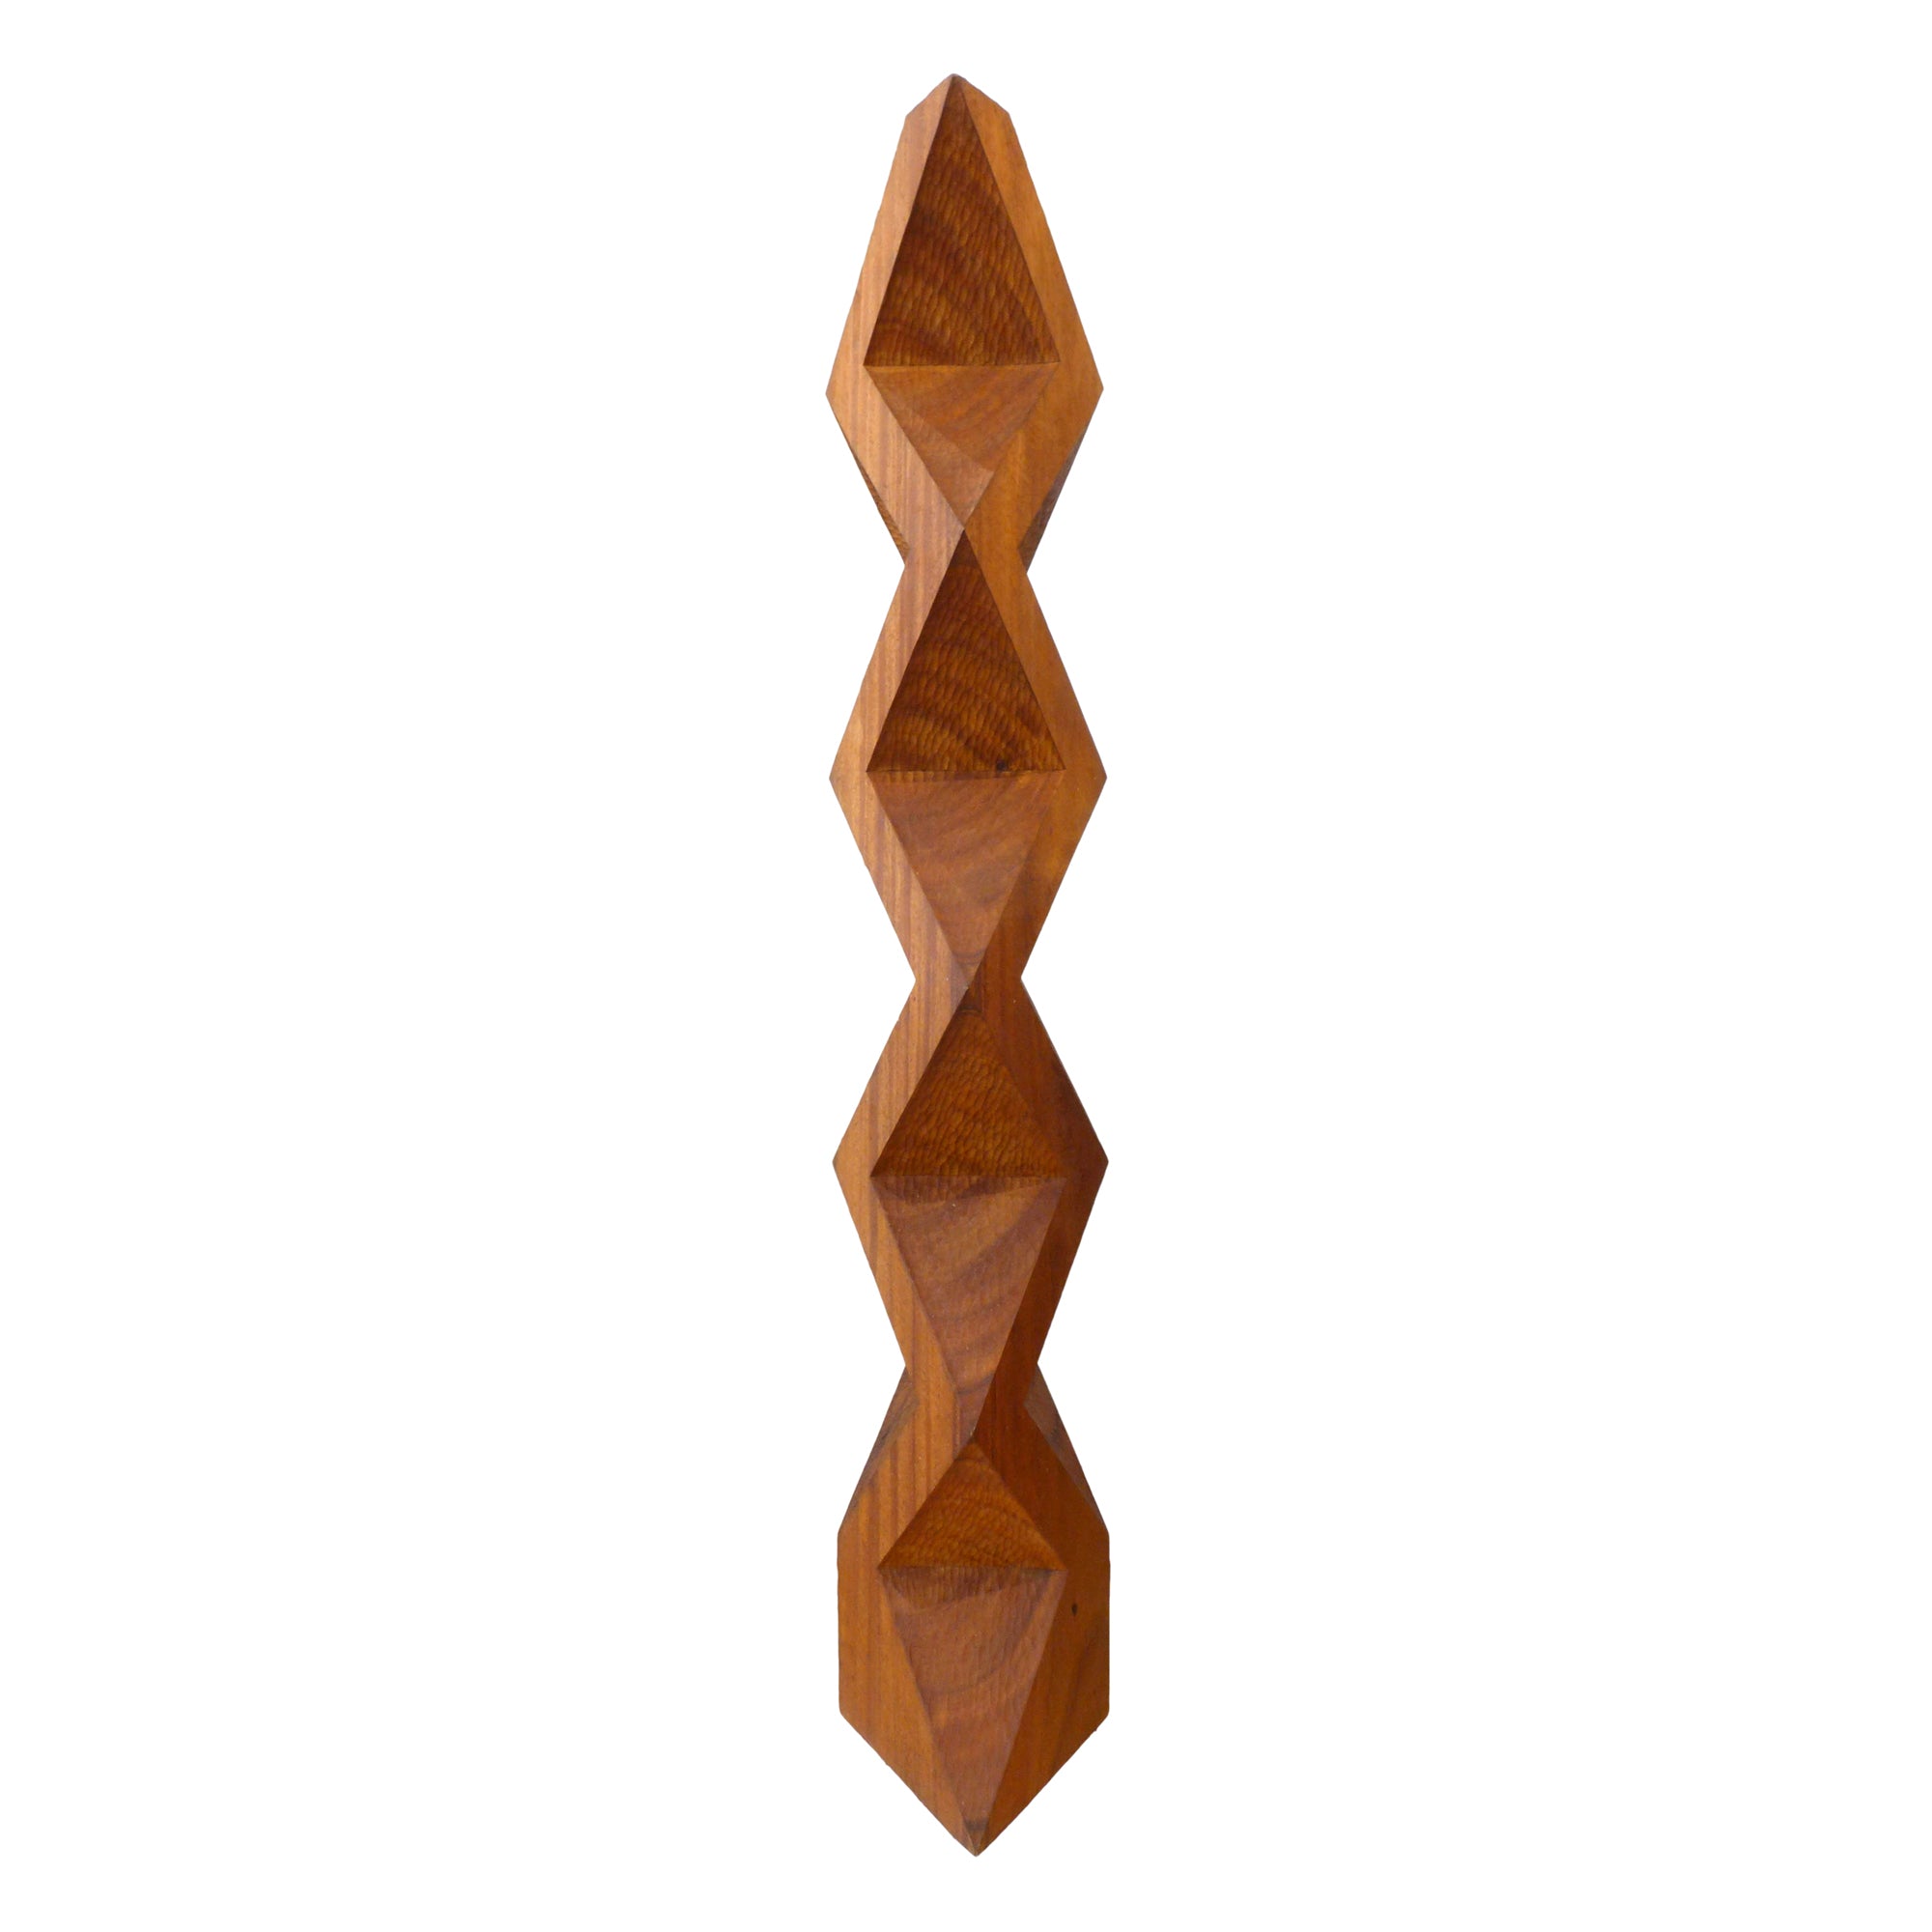 Contemporary Carved Wood Punctured Geometric Totem Sculpture by Aleph Geddis